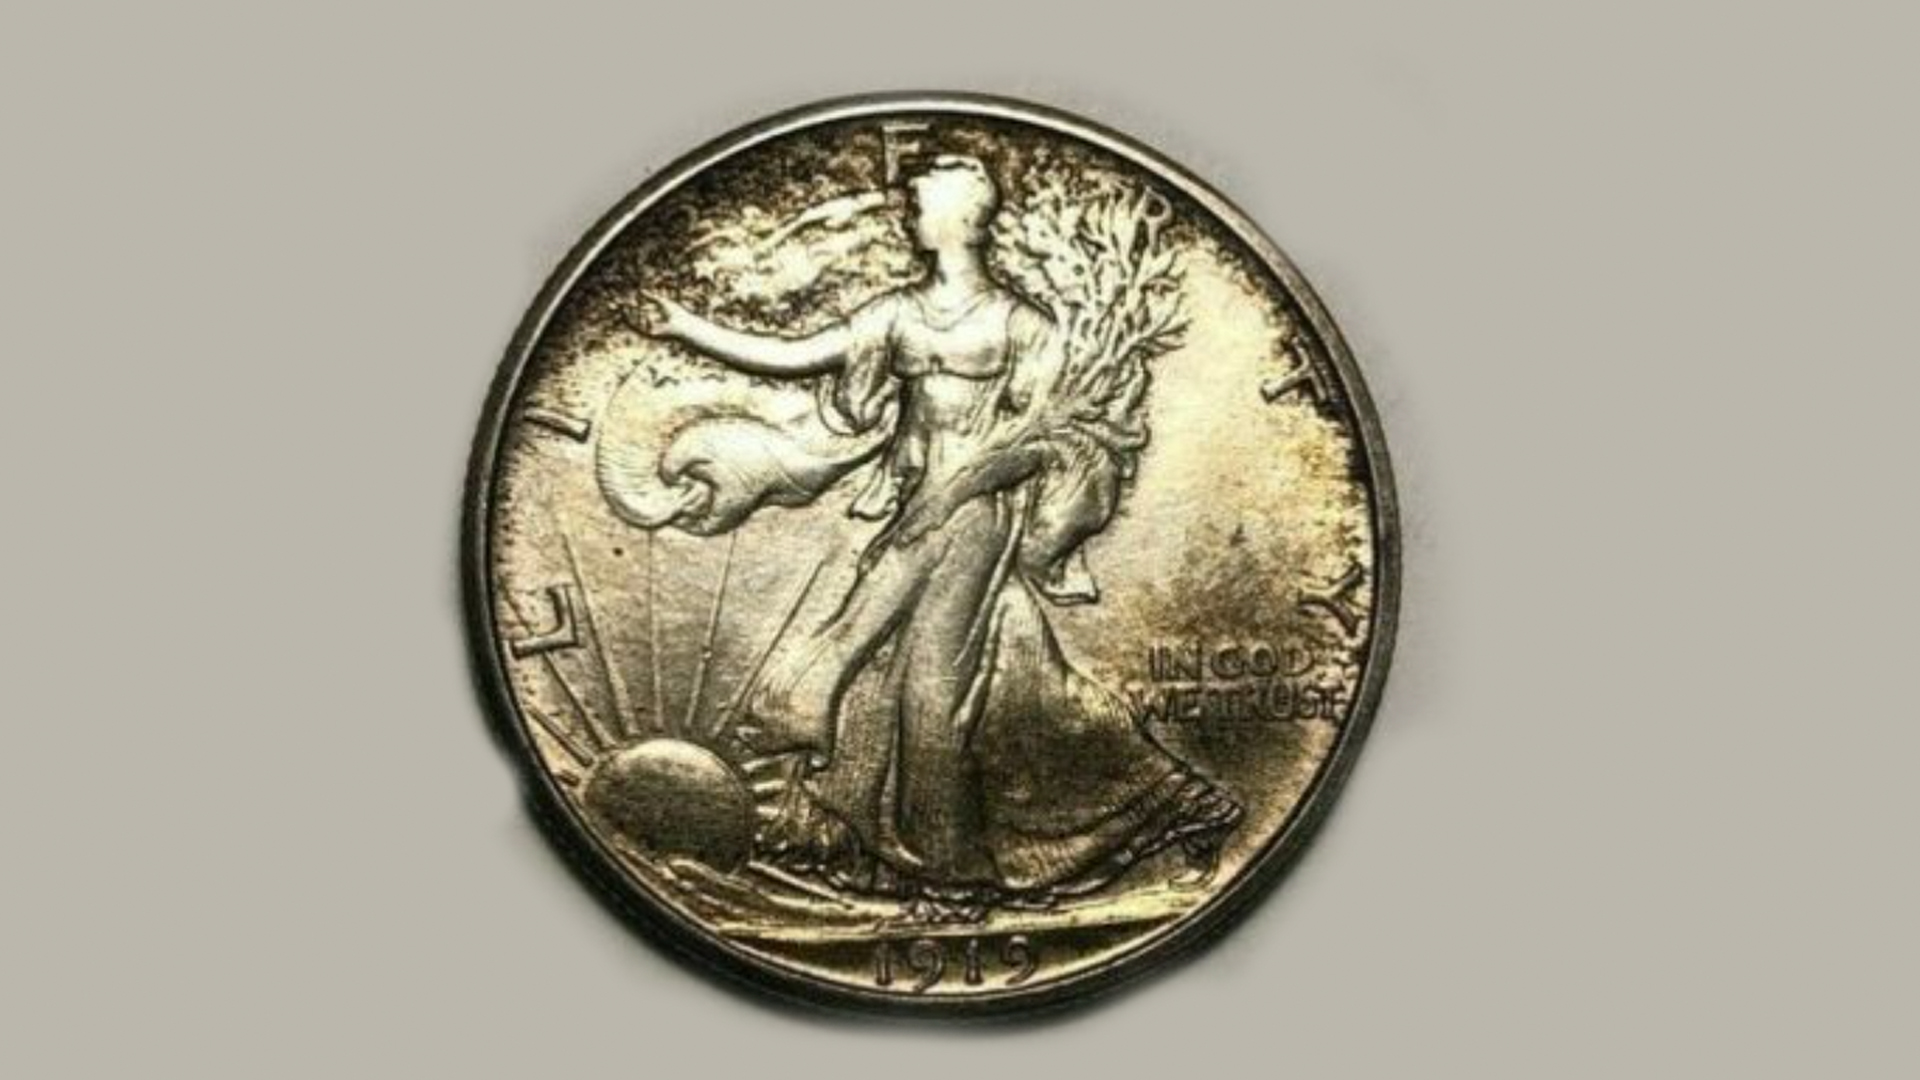 Rare half dollars sell online for $2,225 – this is the exact element that makes them worth thousands